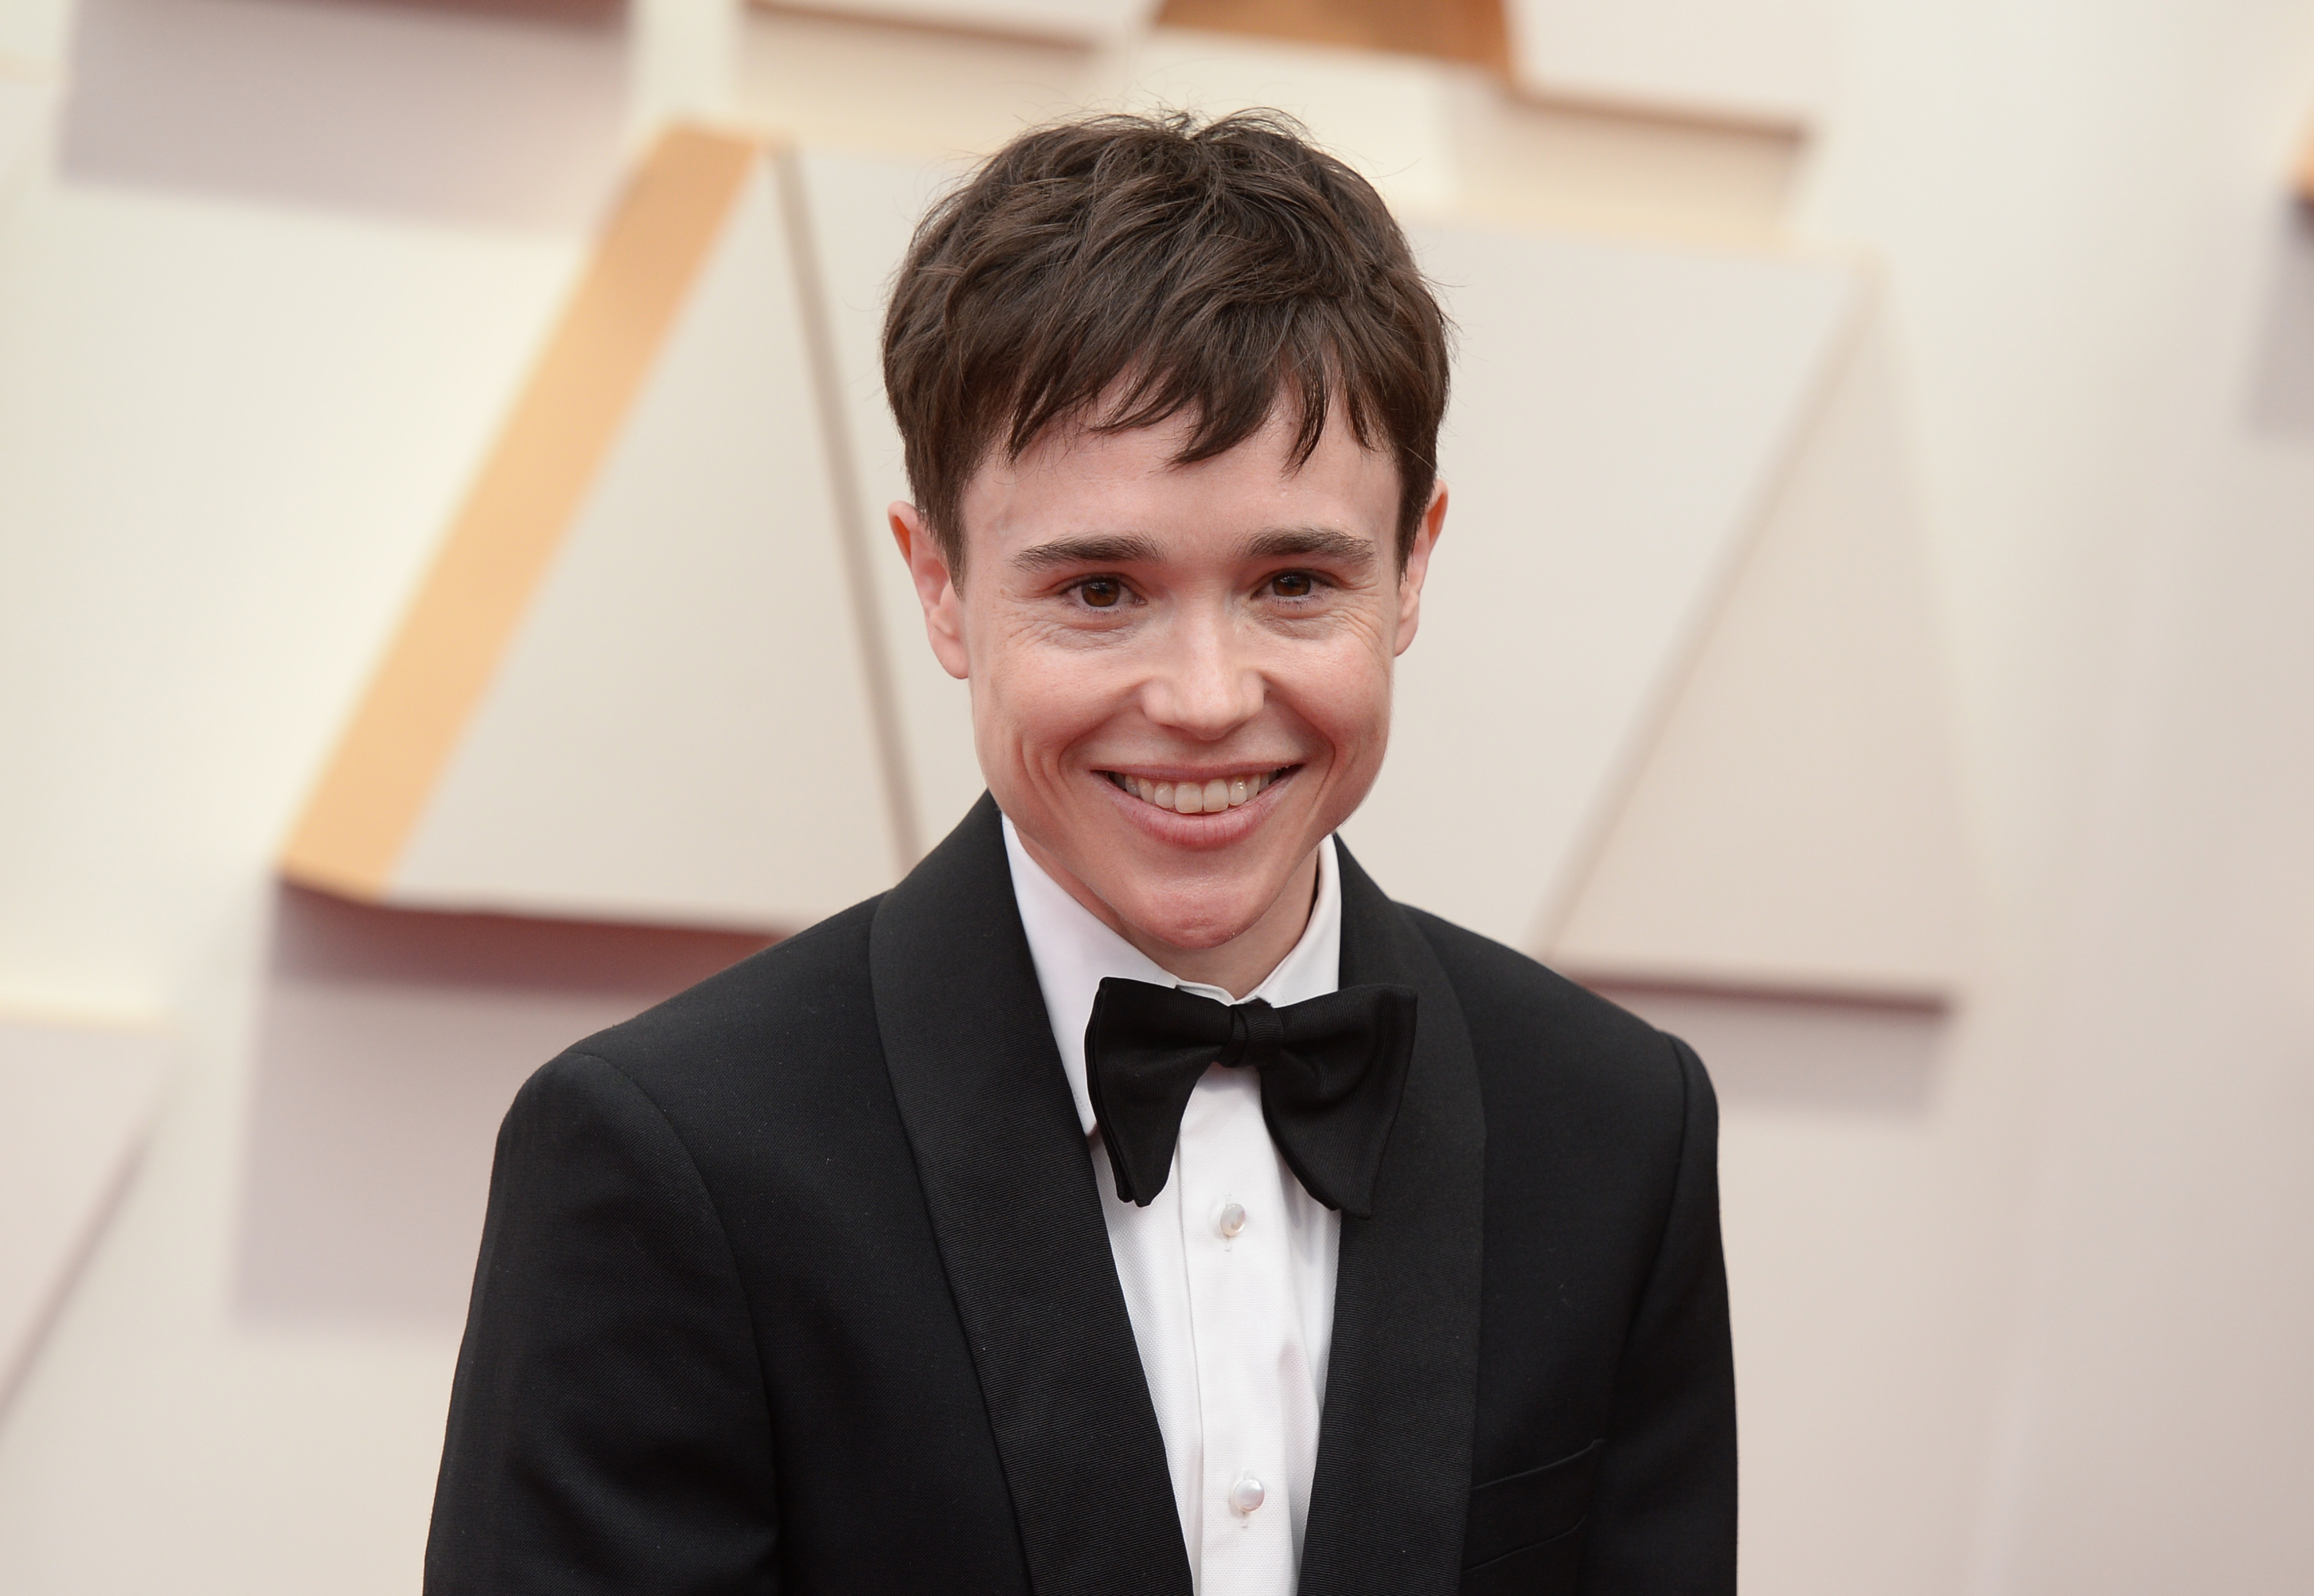 Elliot Page at the 94th Academy Awards held at Dolby Theatre at the Hollywood & Highland Center on March 27th, 2022 in Los Angeles, California.